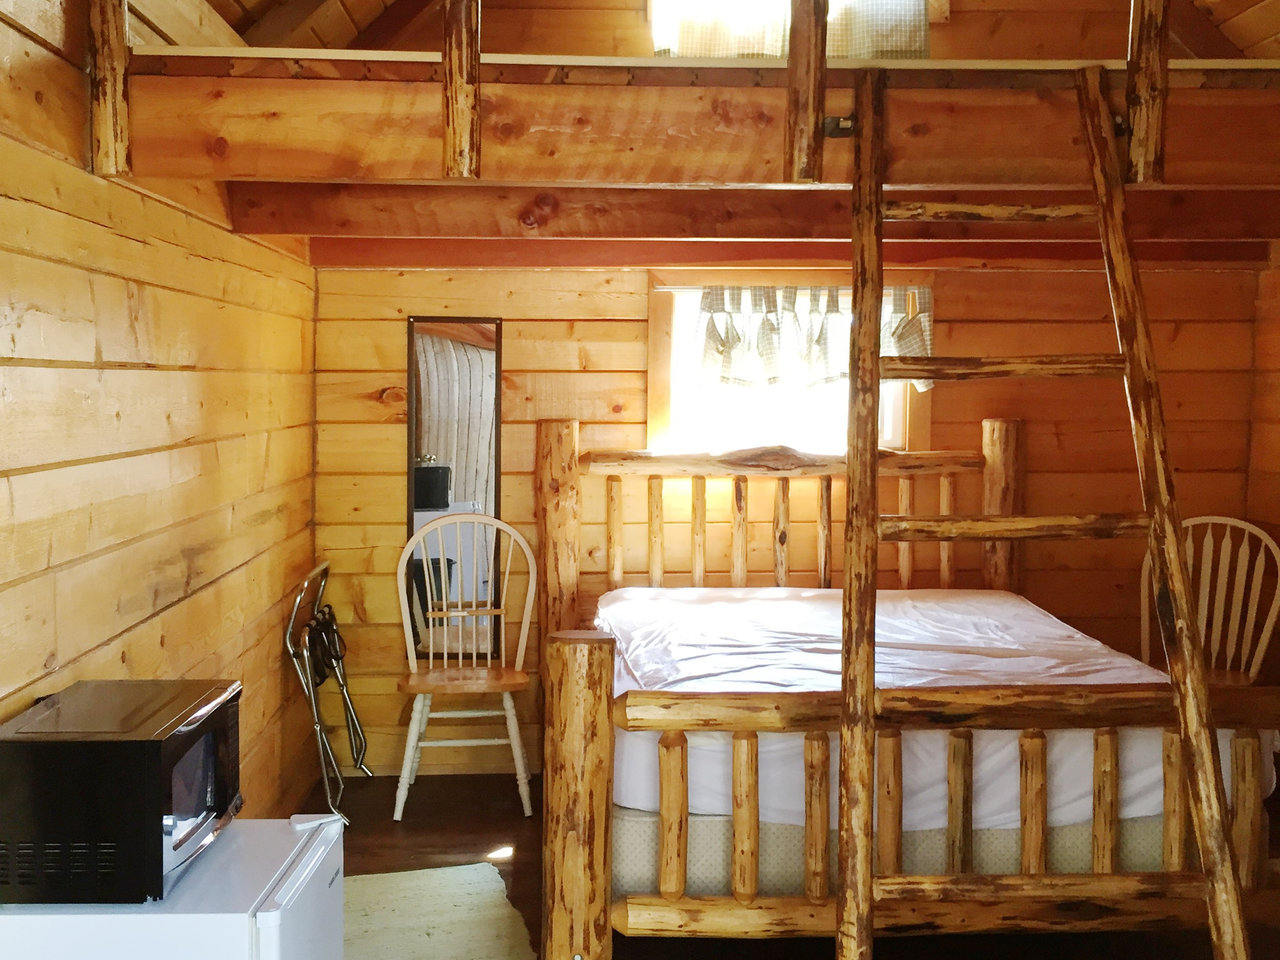 Inside Grinnell Cabin.